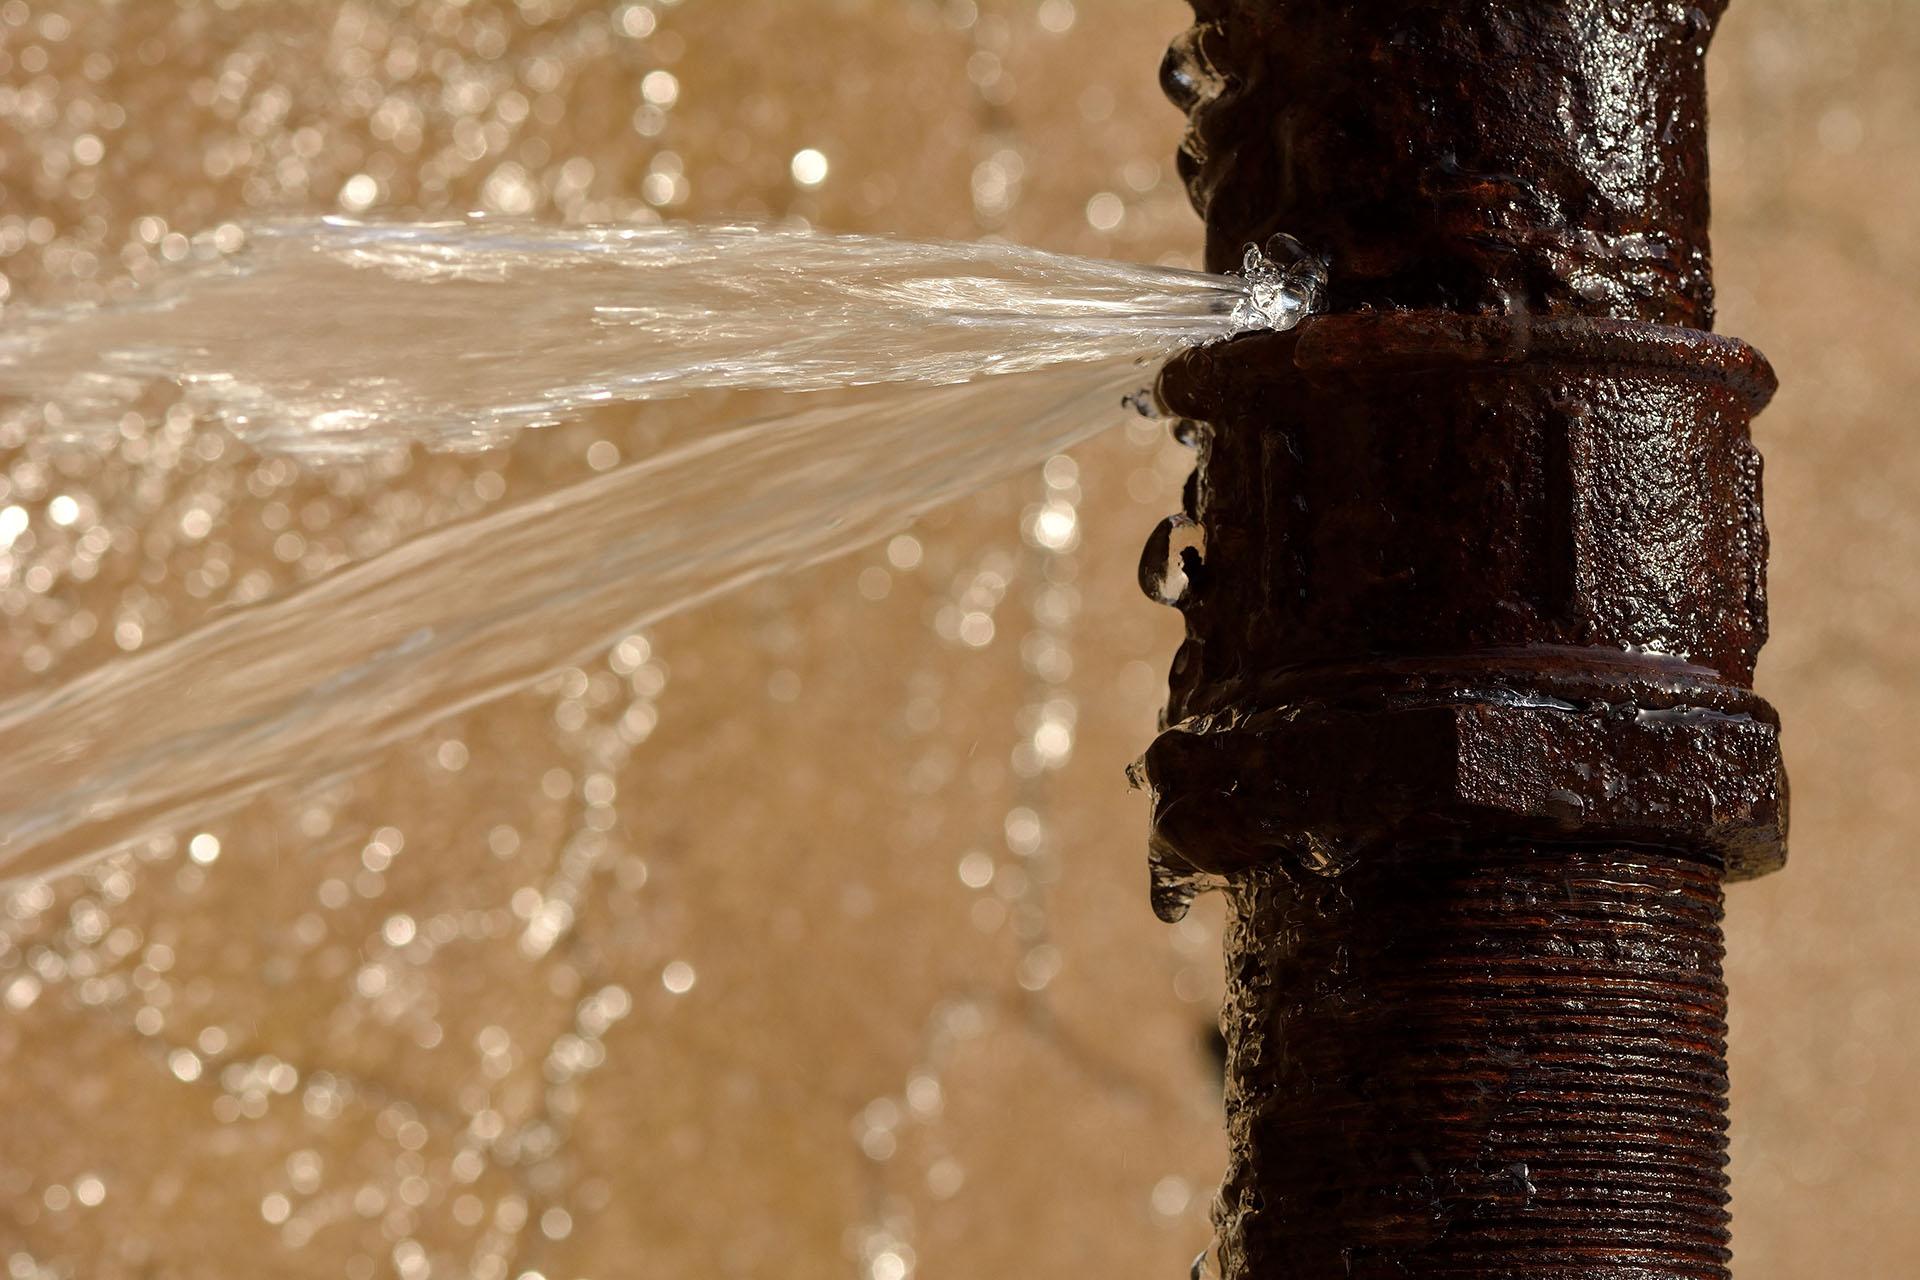 How to Get Rid of a Pipe Burst of Mold Infestation